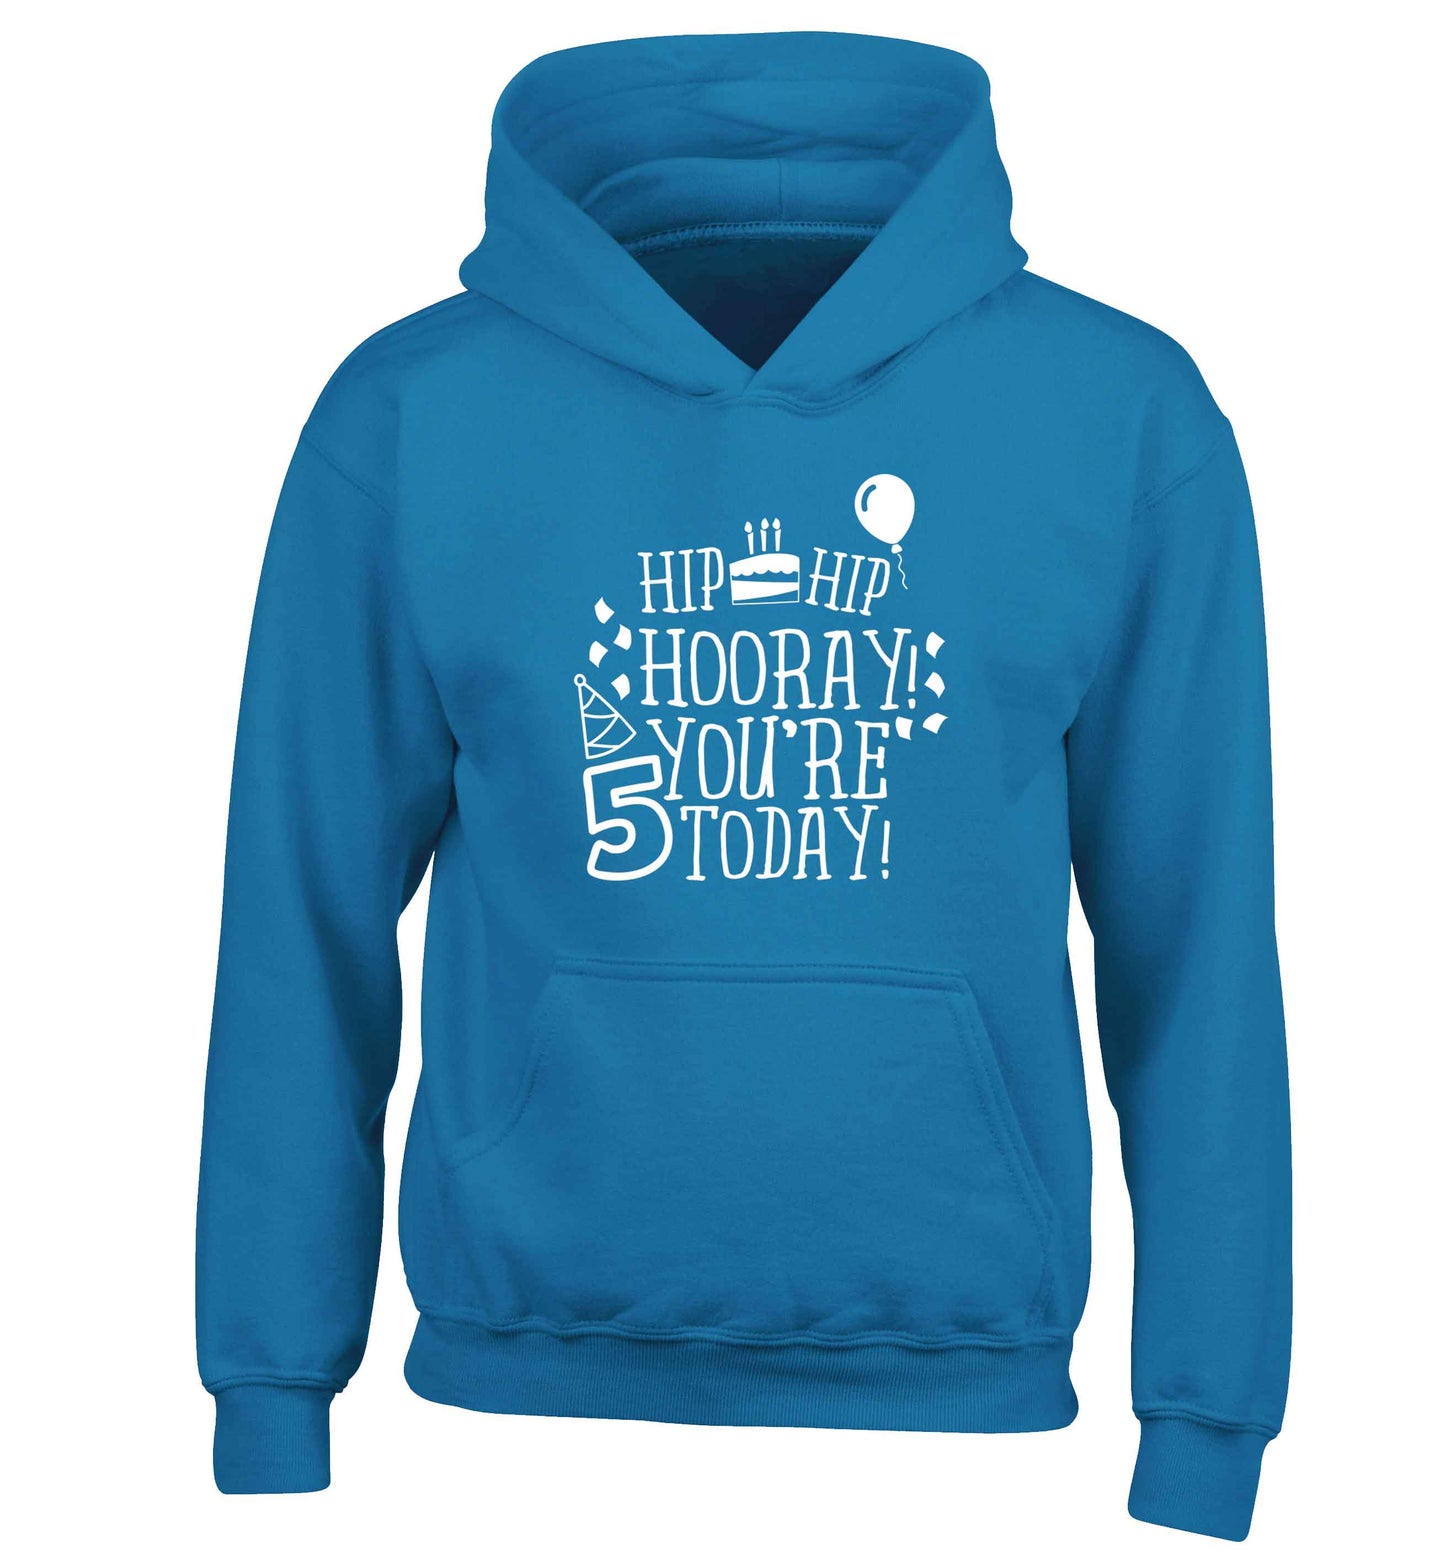 Hip hip hooray you're five today! children's blue hoodie 12-13 Years